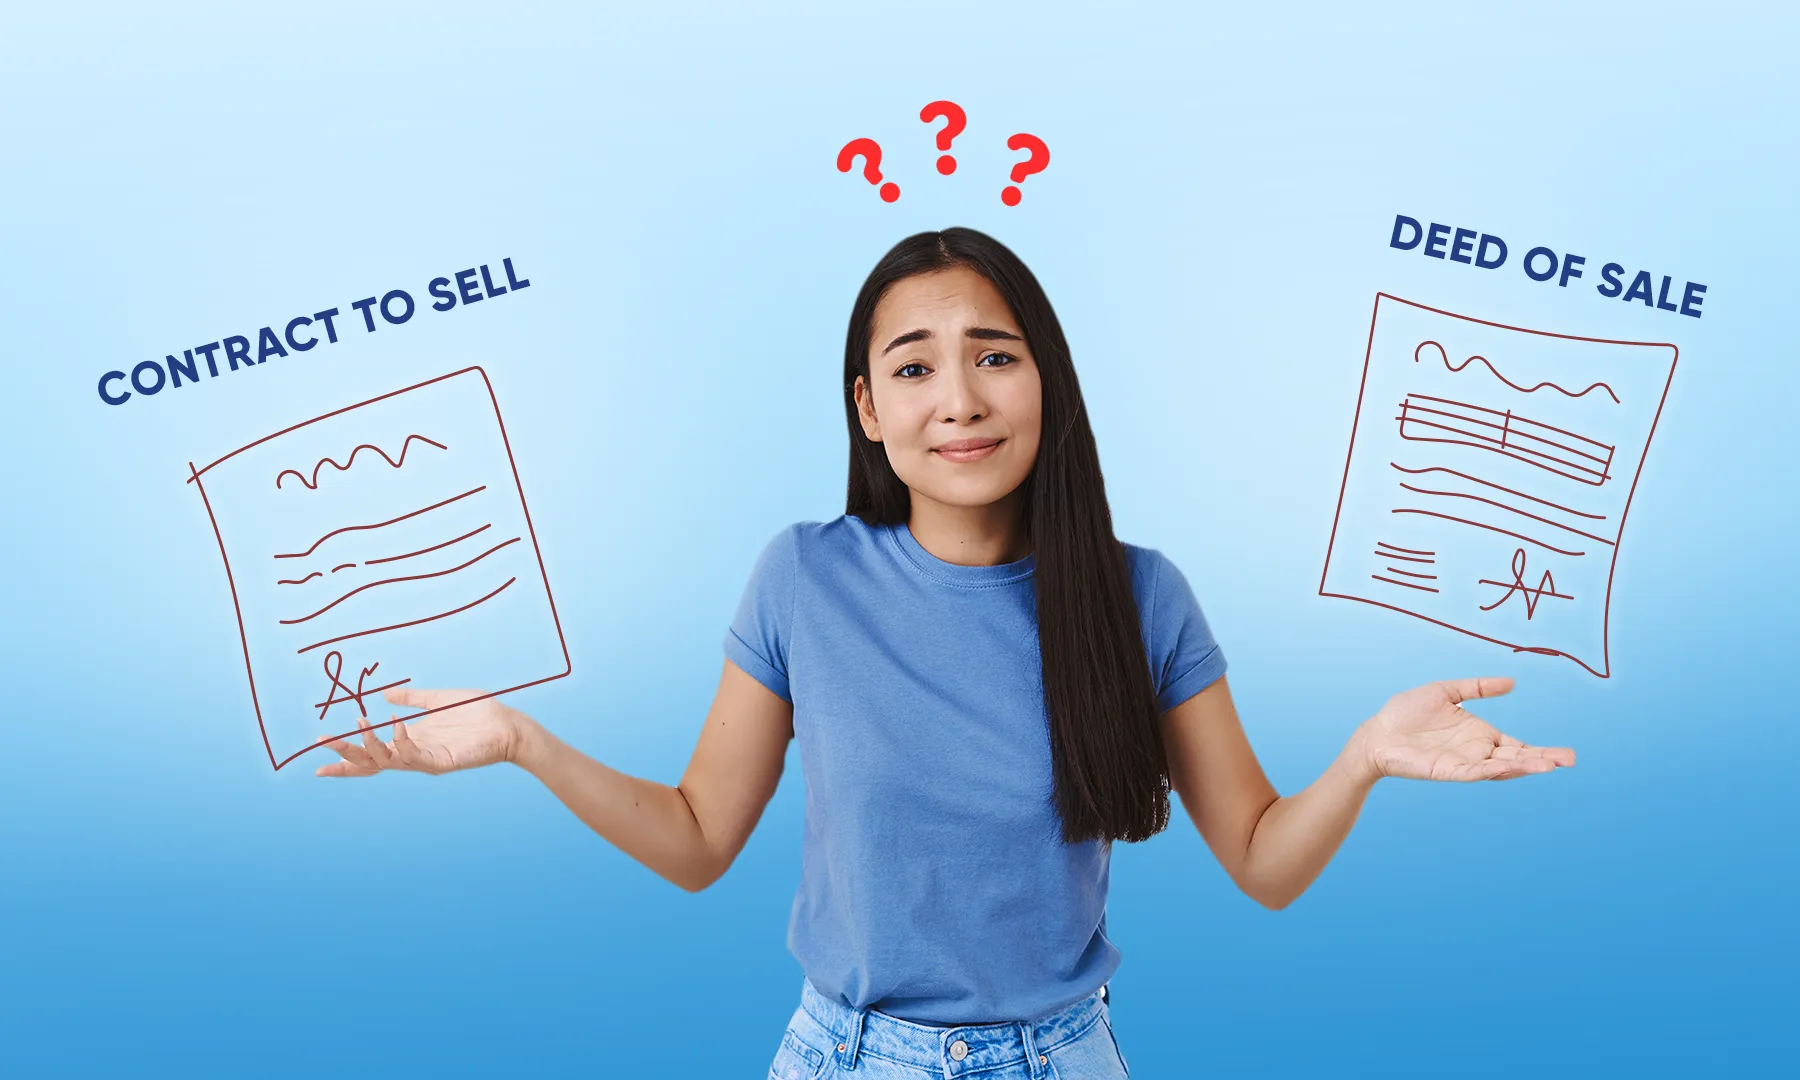 Knowing the Difference between Contract to Sell vs Deed of Sale